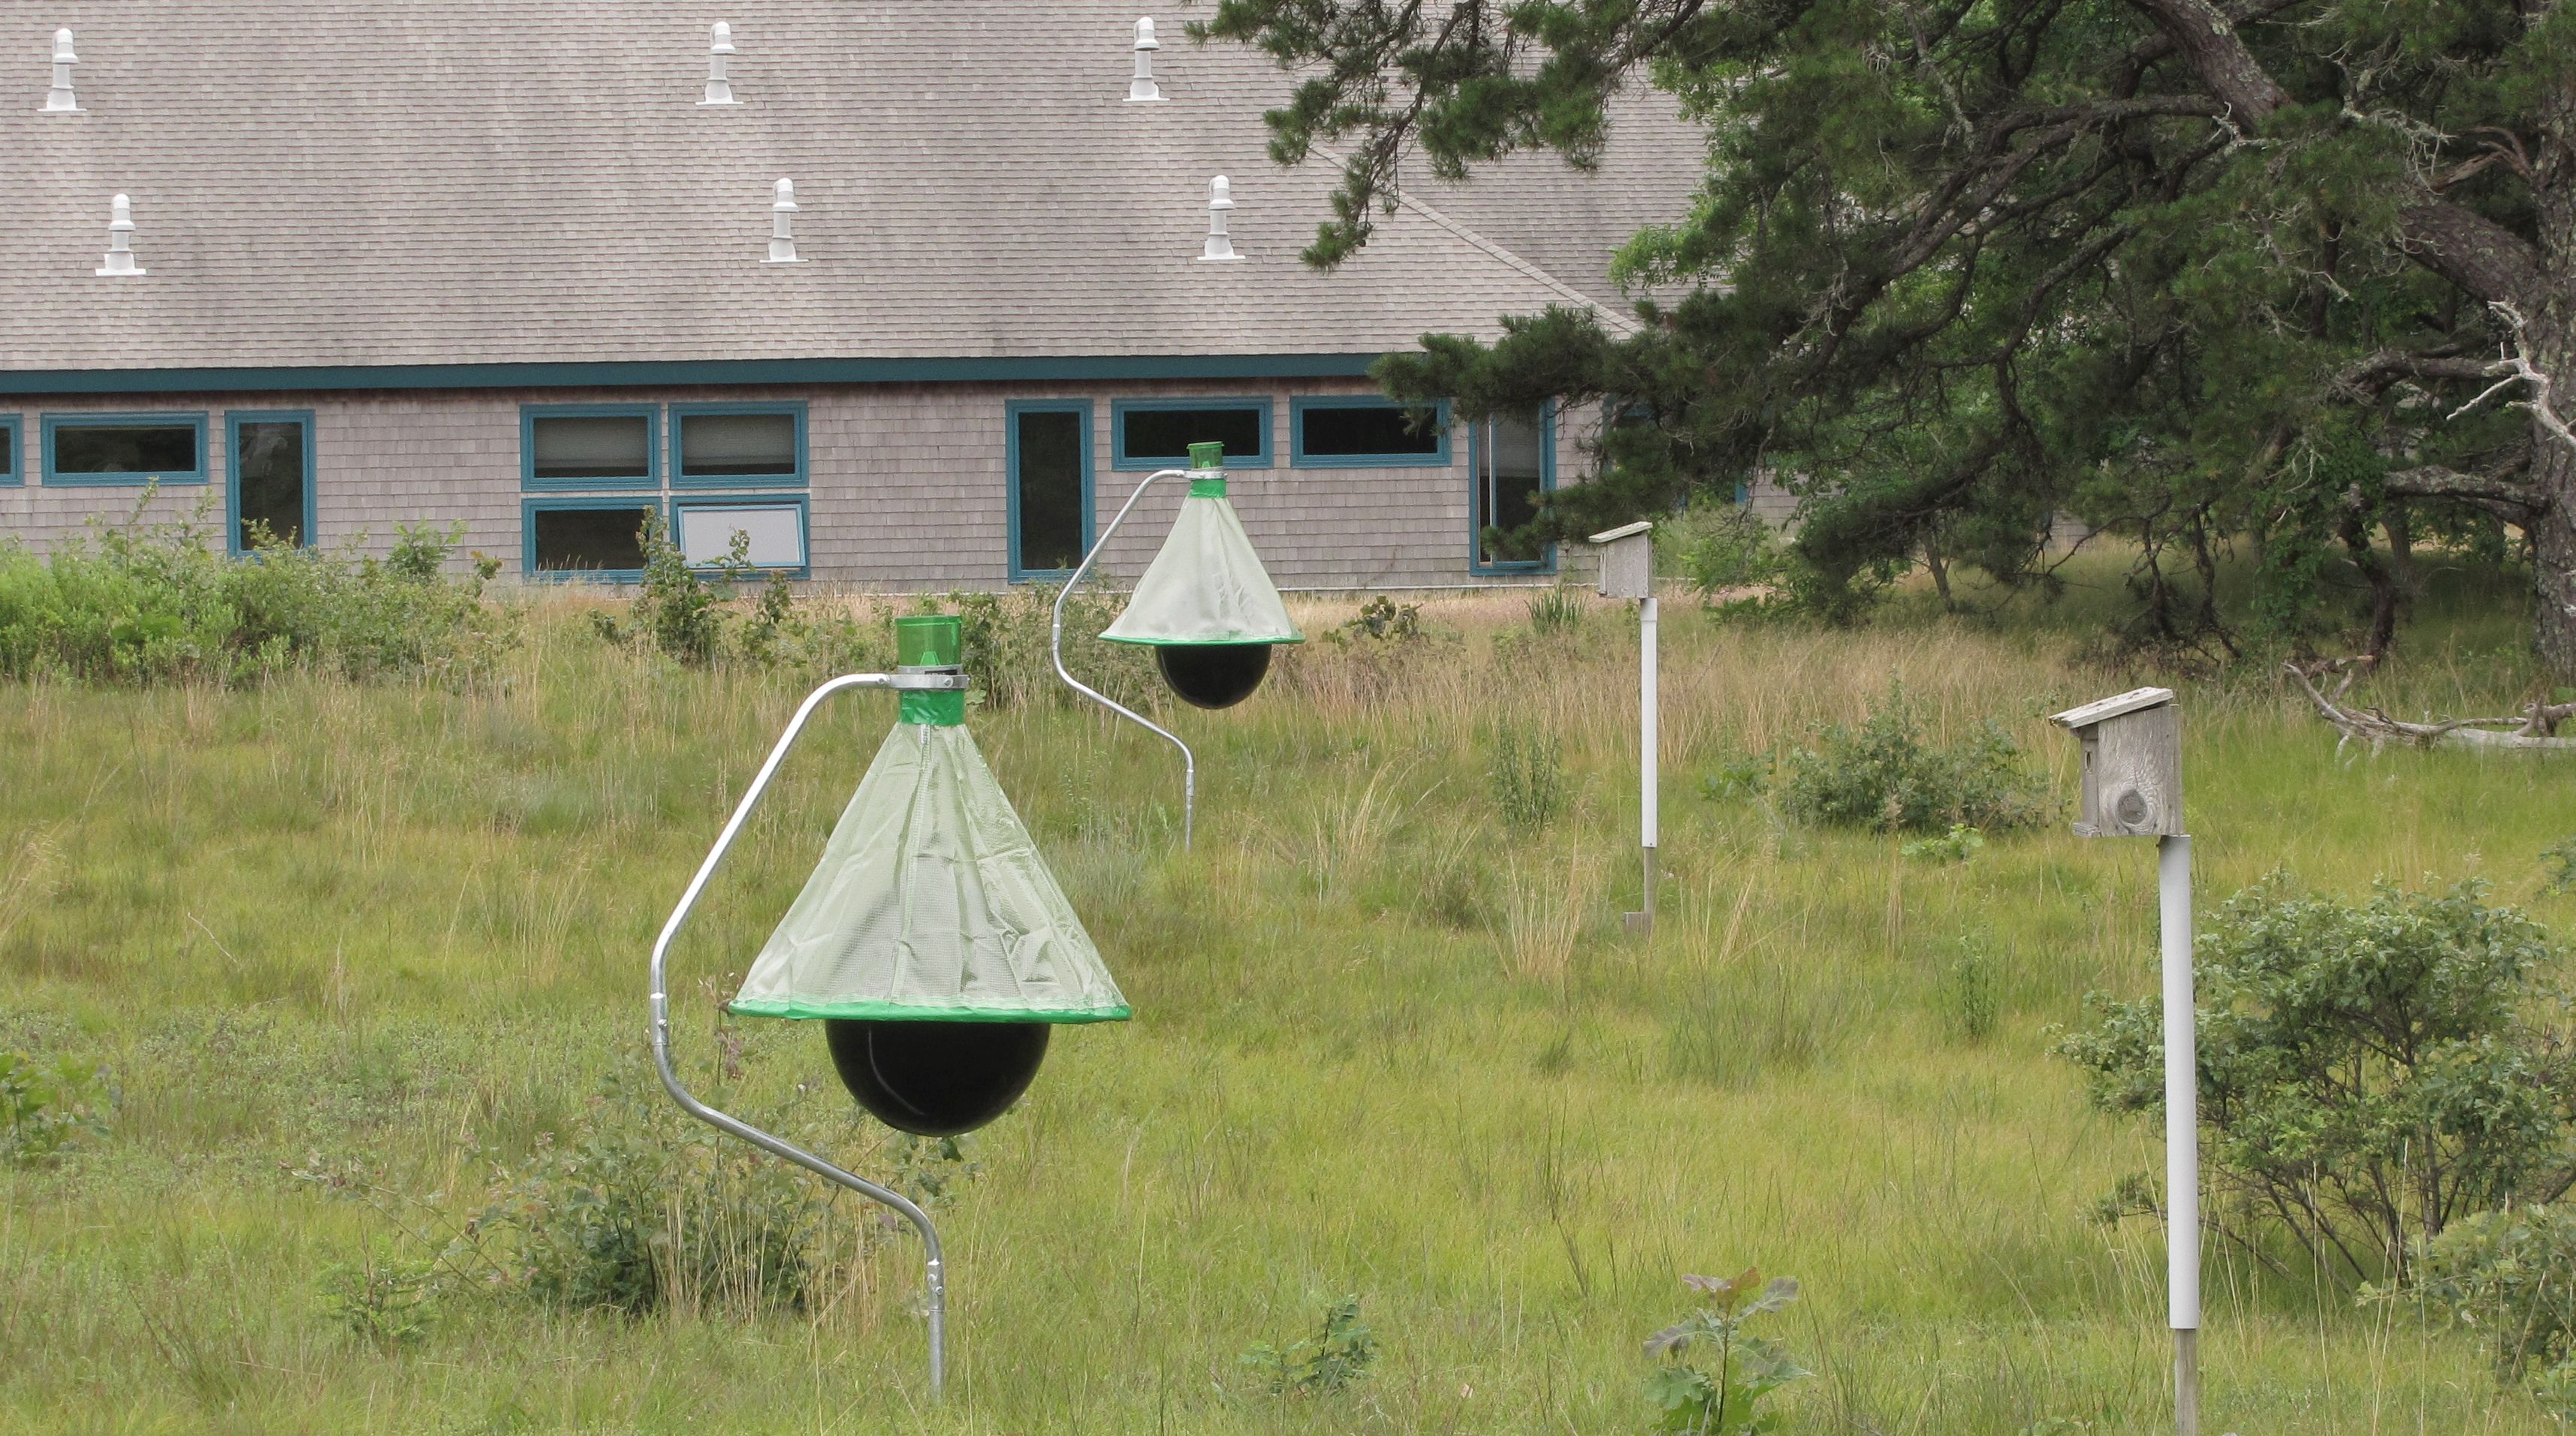 Blog - Ditch The Fly Traps For Good Inside Your Boise Home!